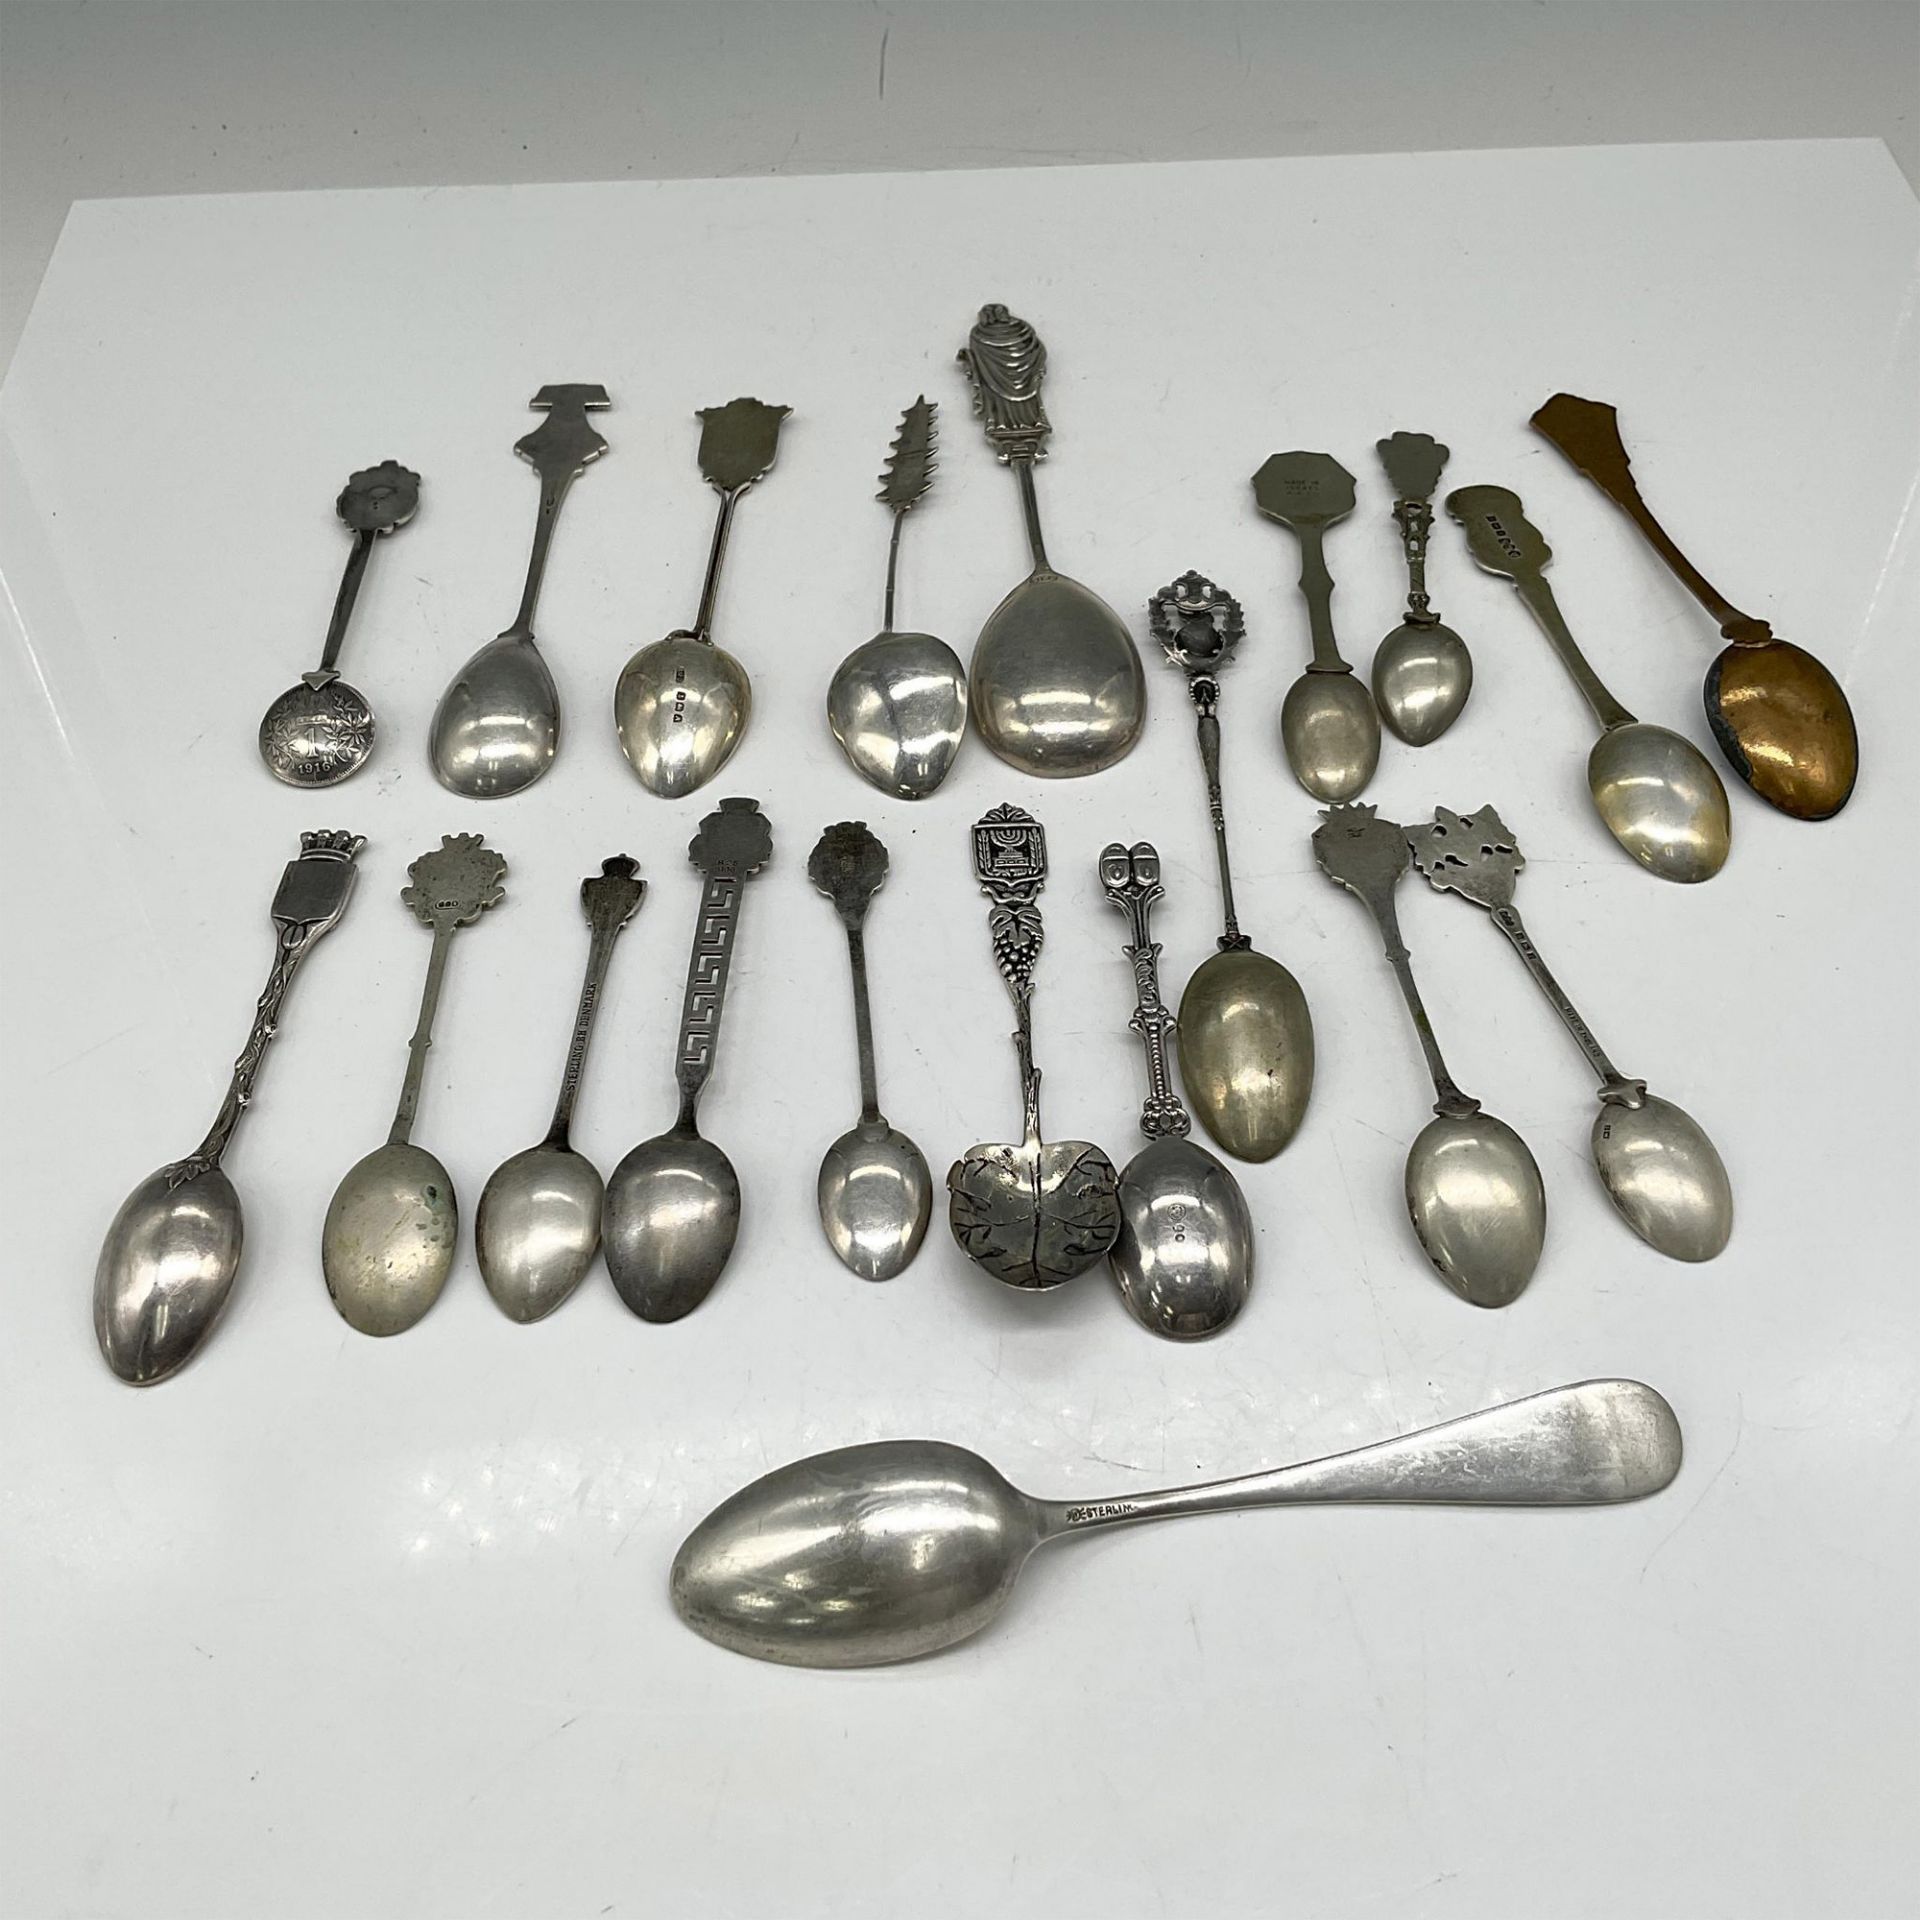 20pc Vintage Collectible Sterling + Silver Souvenir Spoons - Image 5 of 5